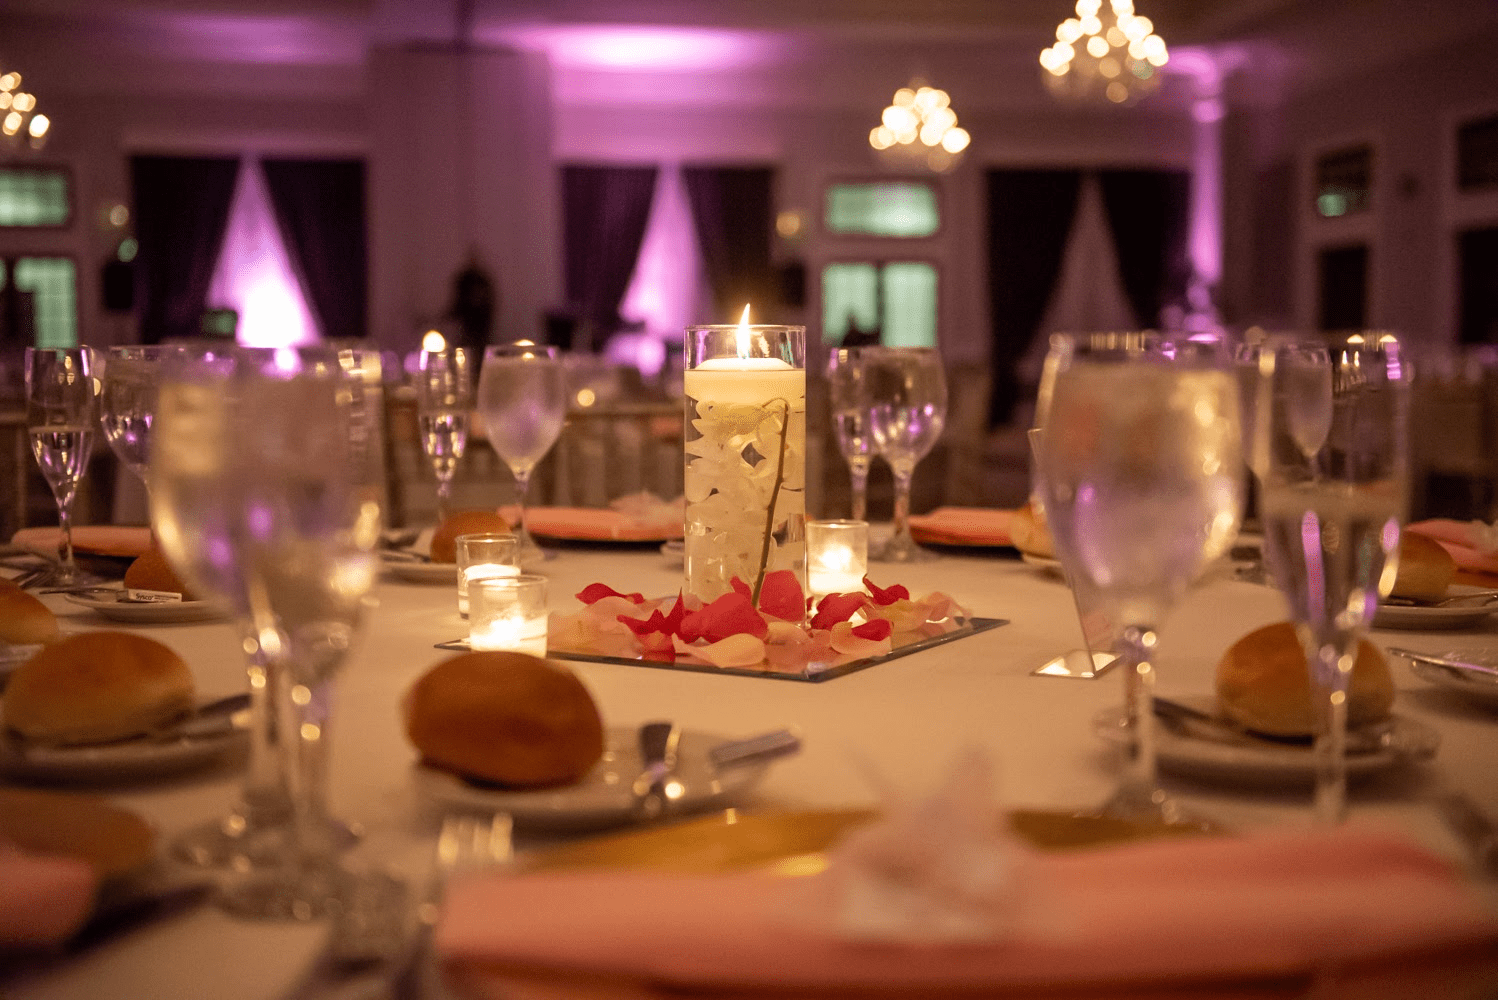 Close up image of a table decorated for a wedding reception